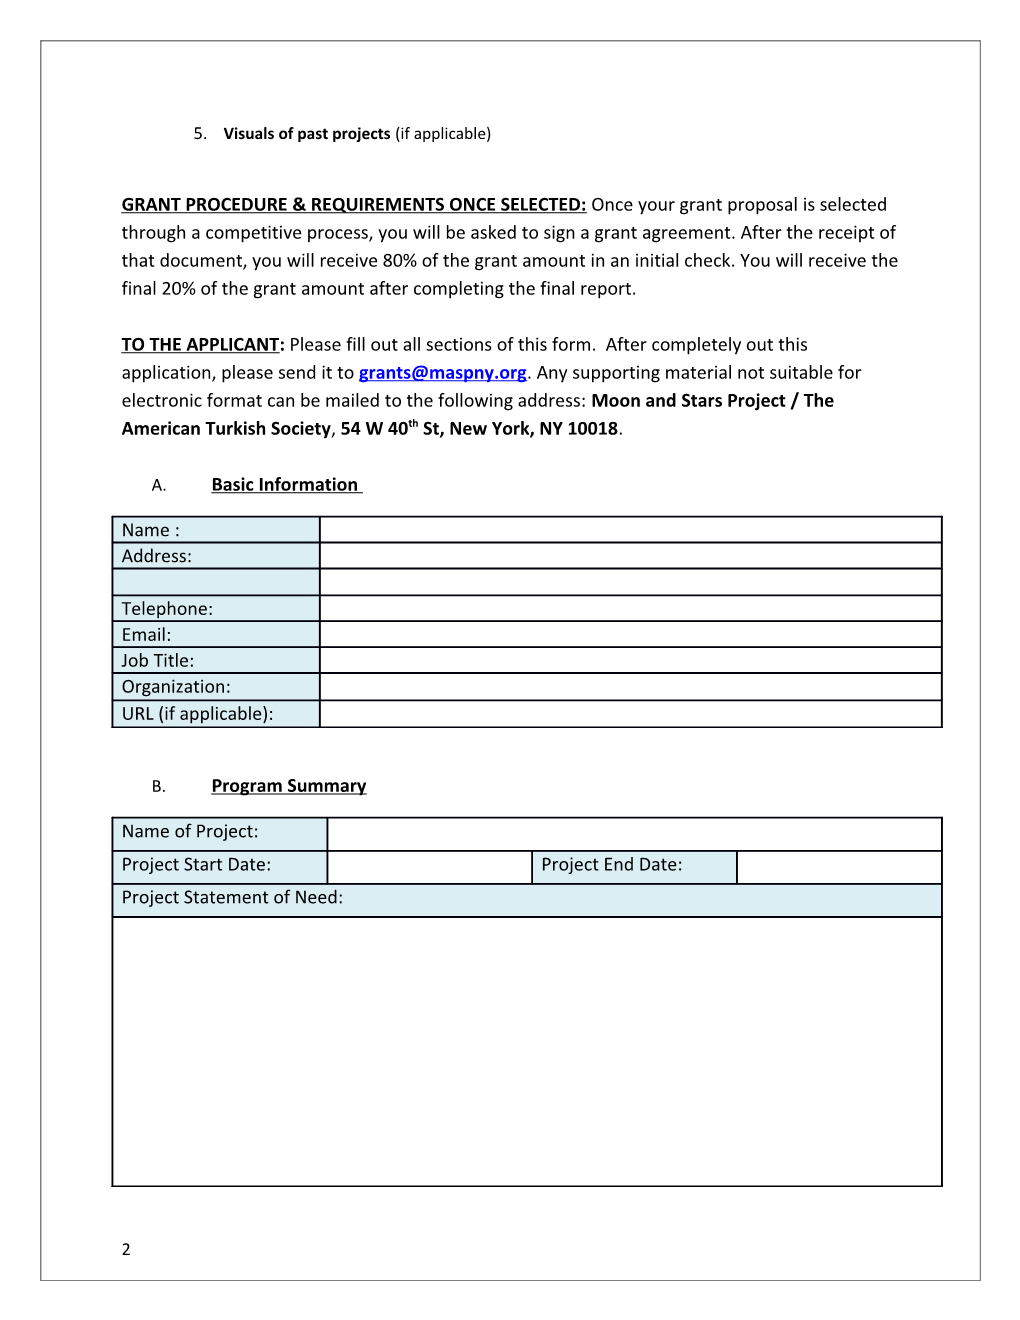 Grant Application Requirements